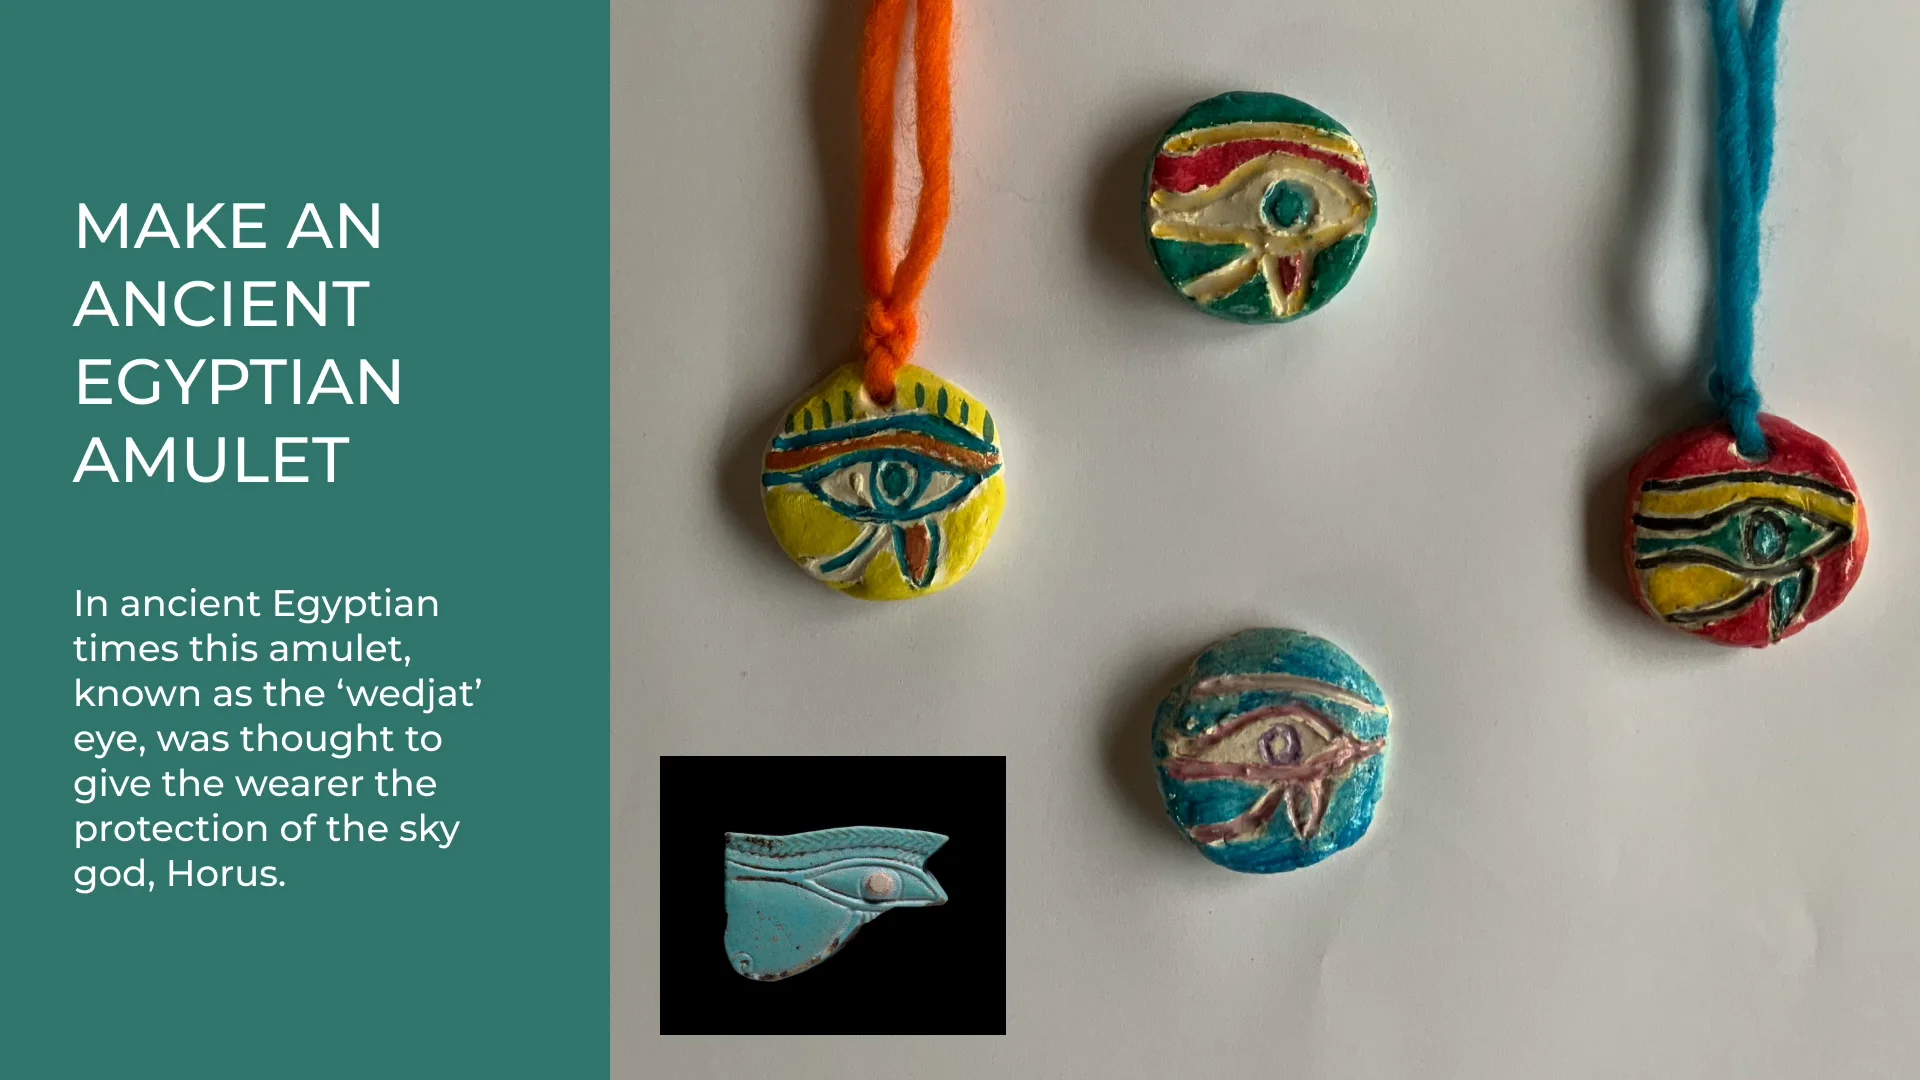 Make an Ancient Egyptian Amulet